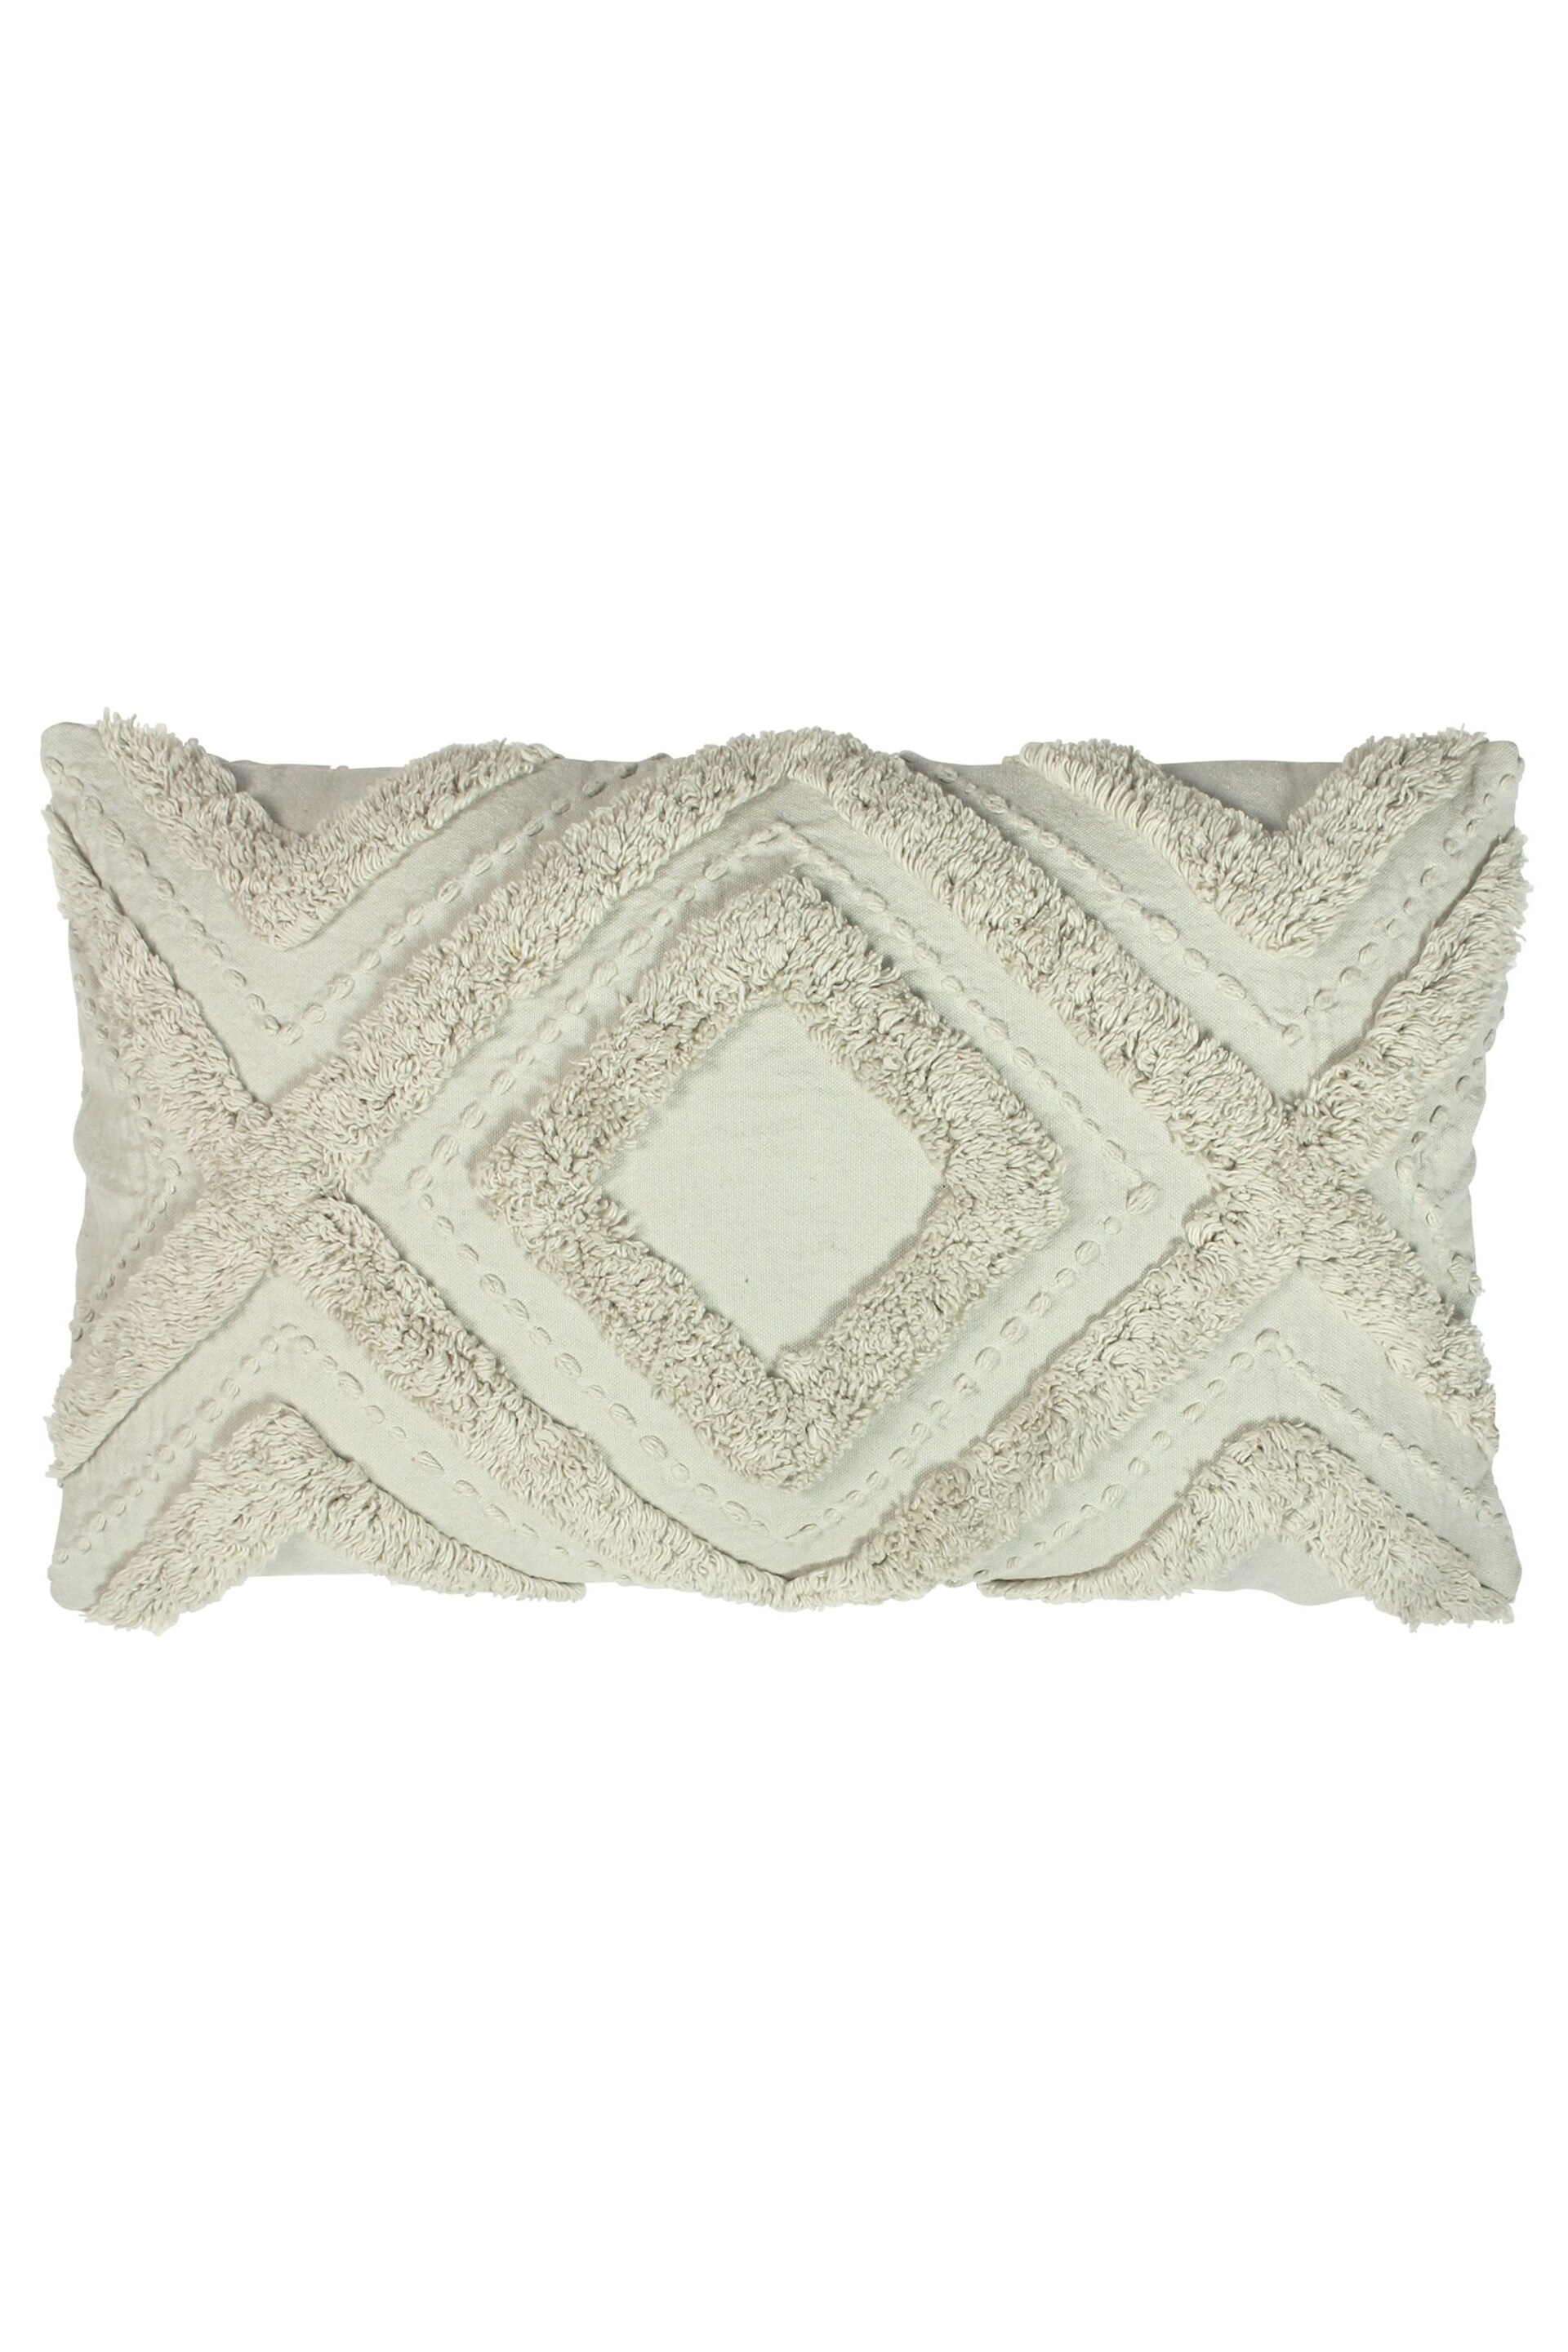 furn. Taupe Grey Orson Tufted Polyester Filled Cushion - Image 1 of 4